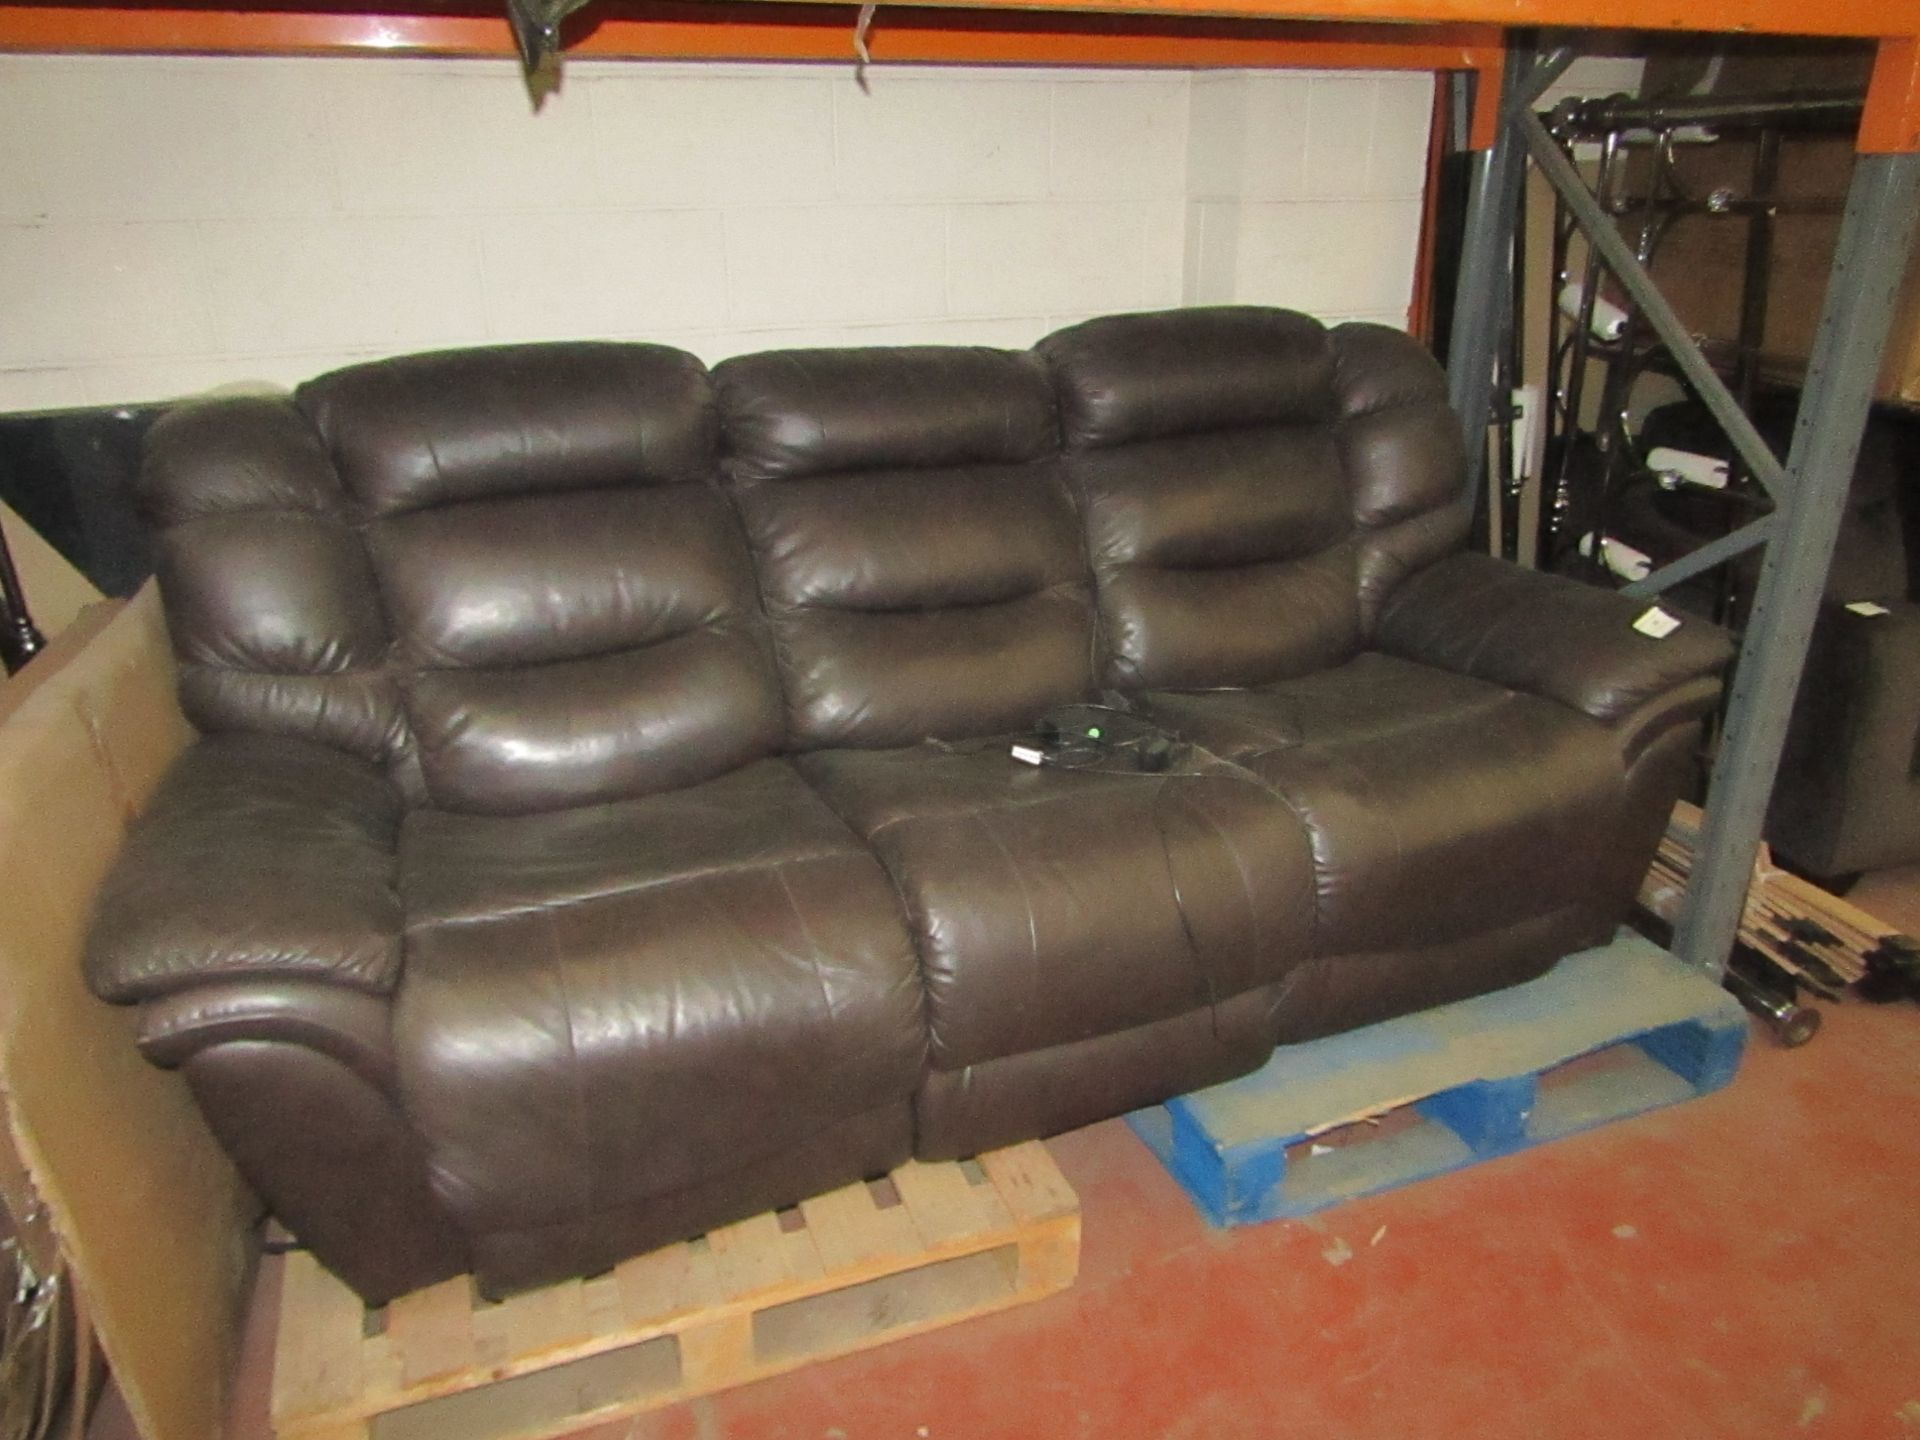 La Z boy 3 seater electric reclining Sofa with power pack, tested, mechanism fully working